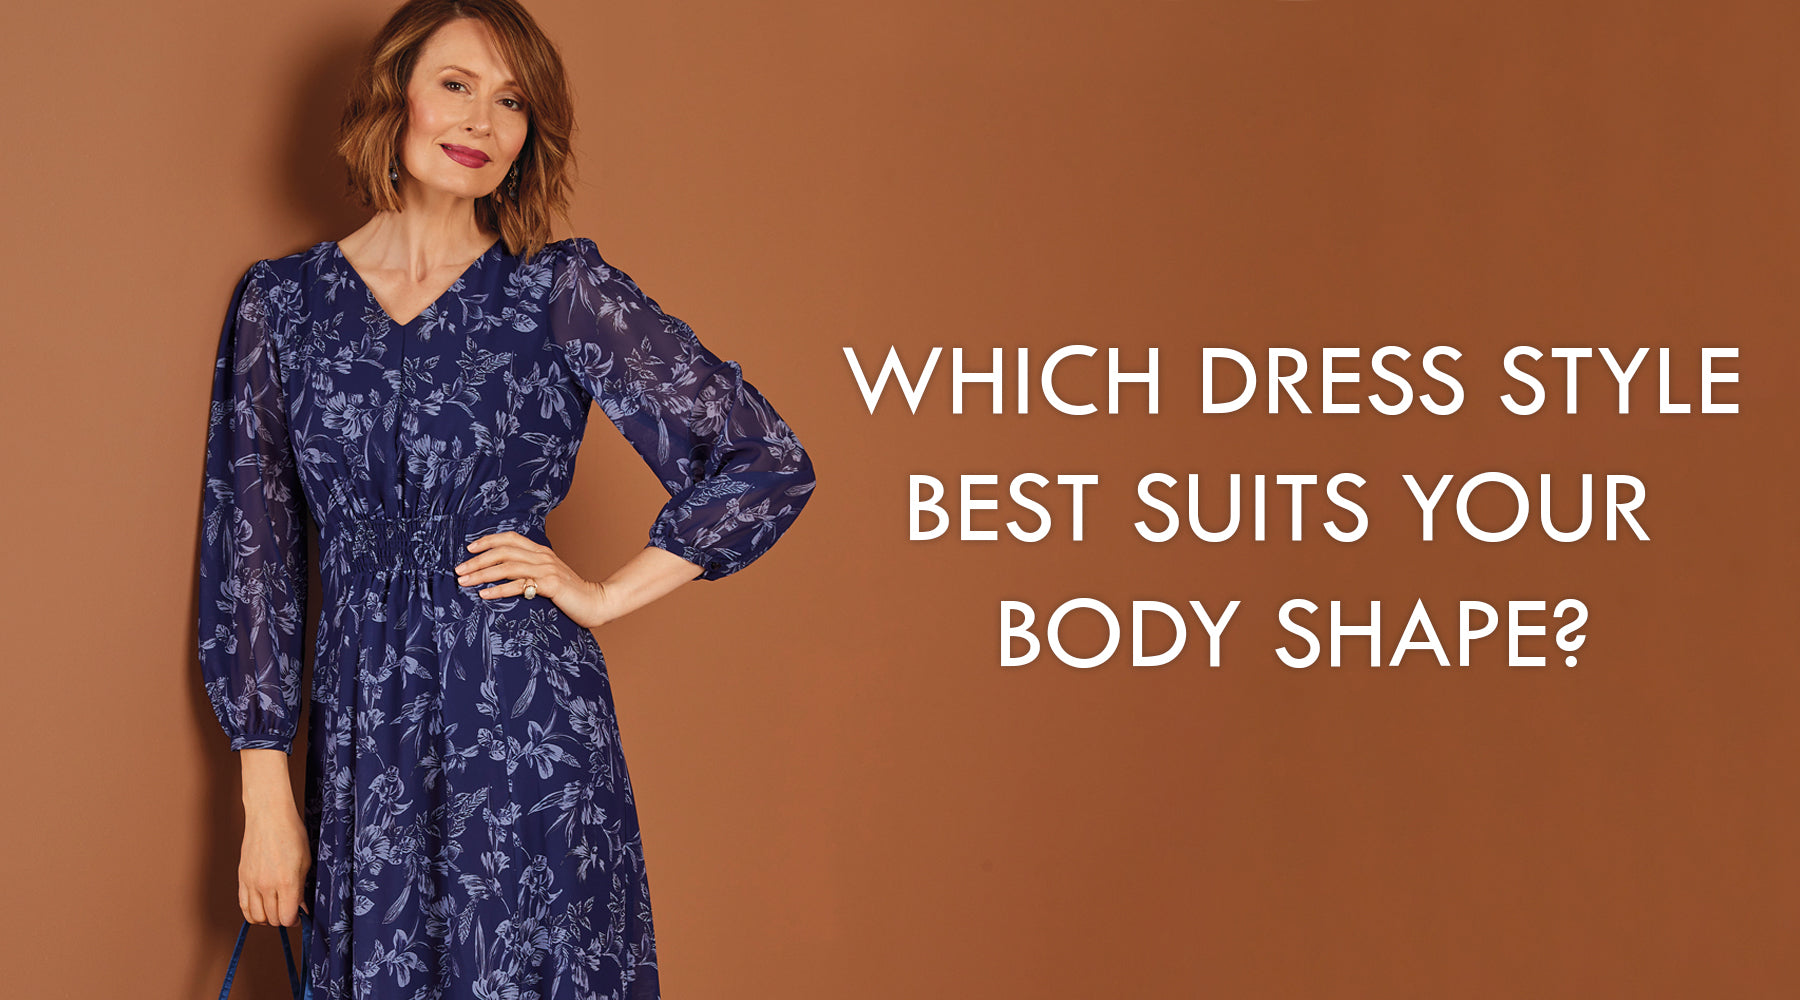 What dress style best suits your body shape?